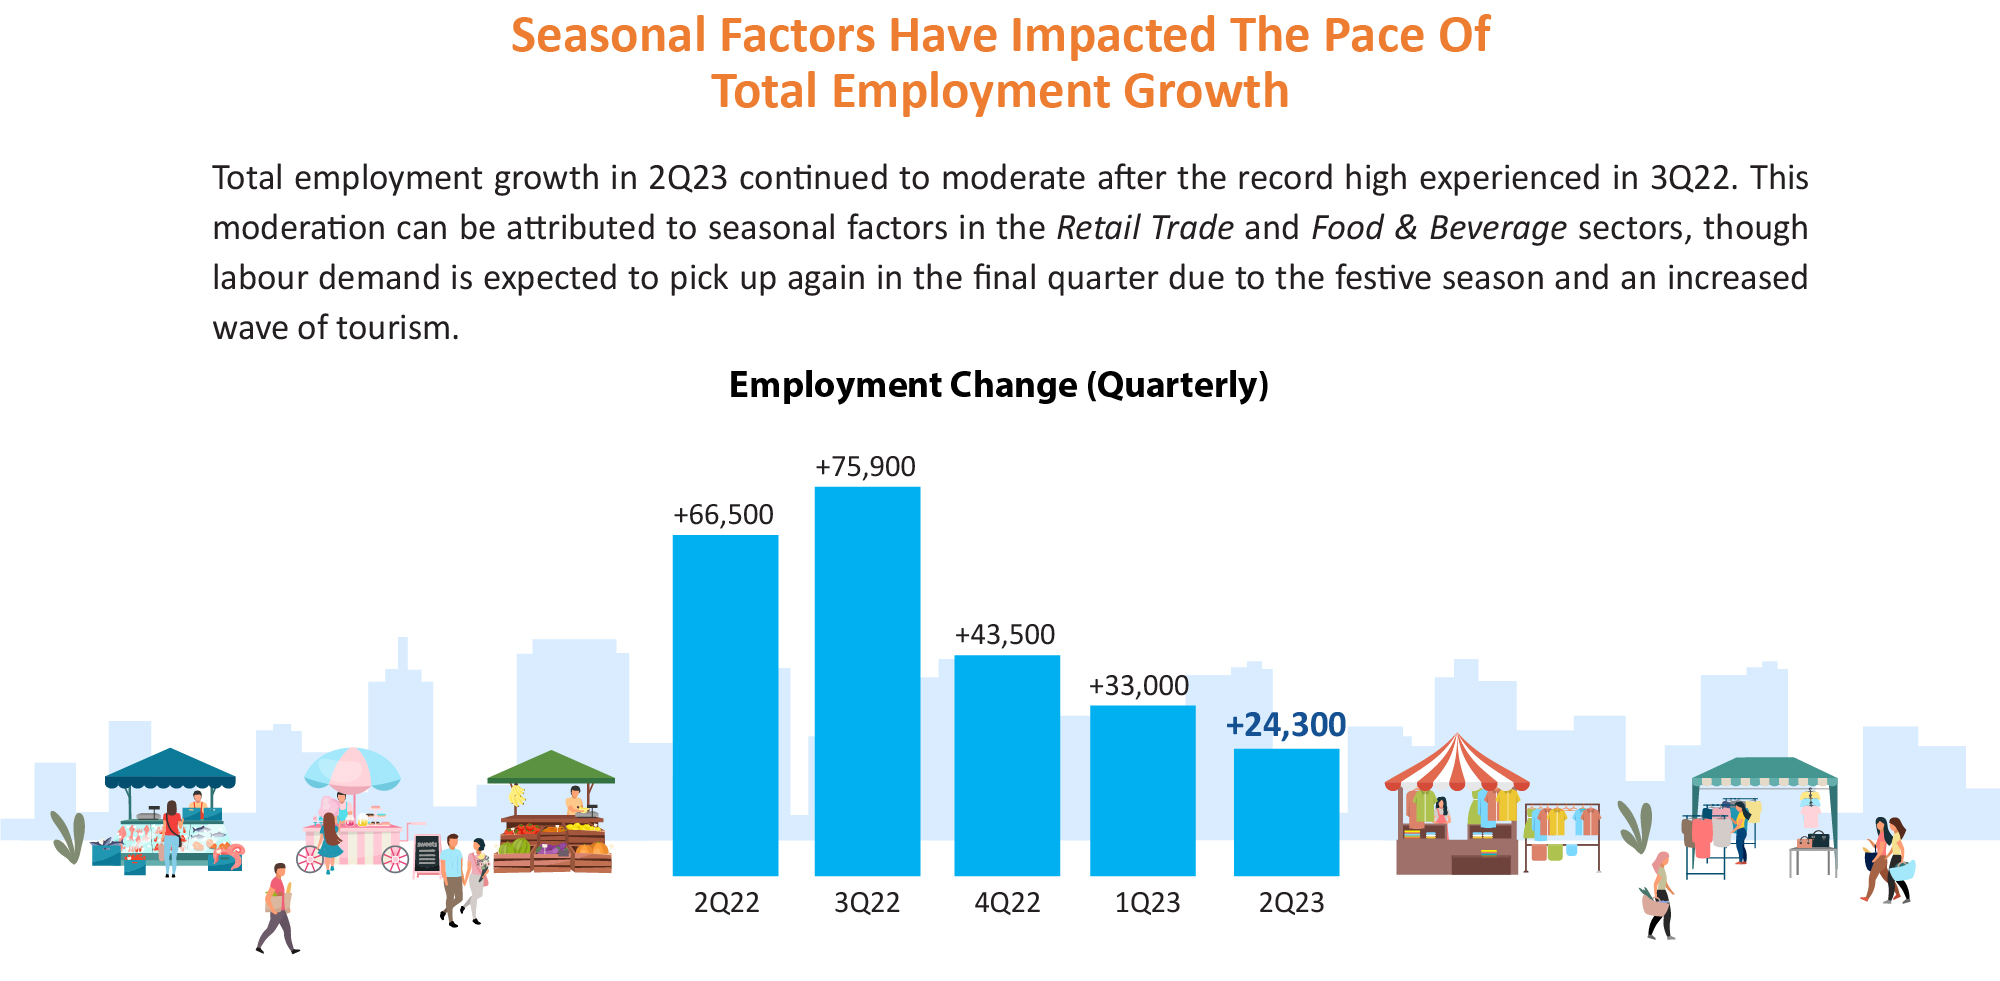 Seasonal Factors Have impacted The pace of Total Employment Growth